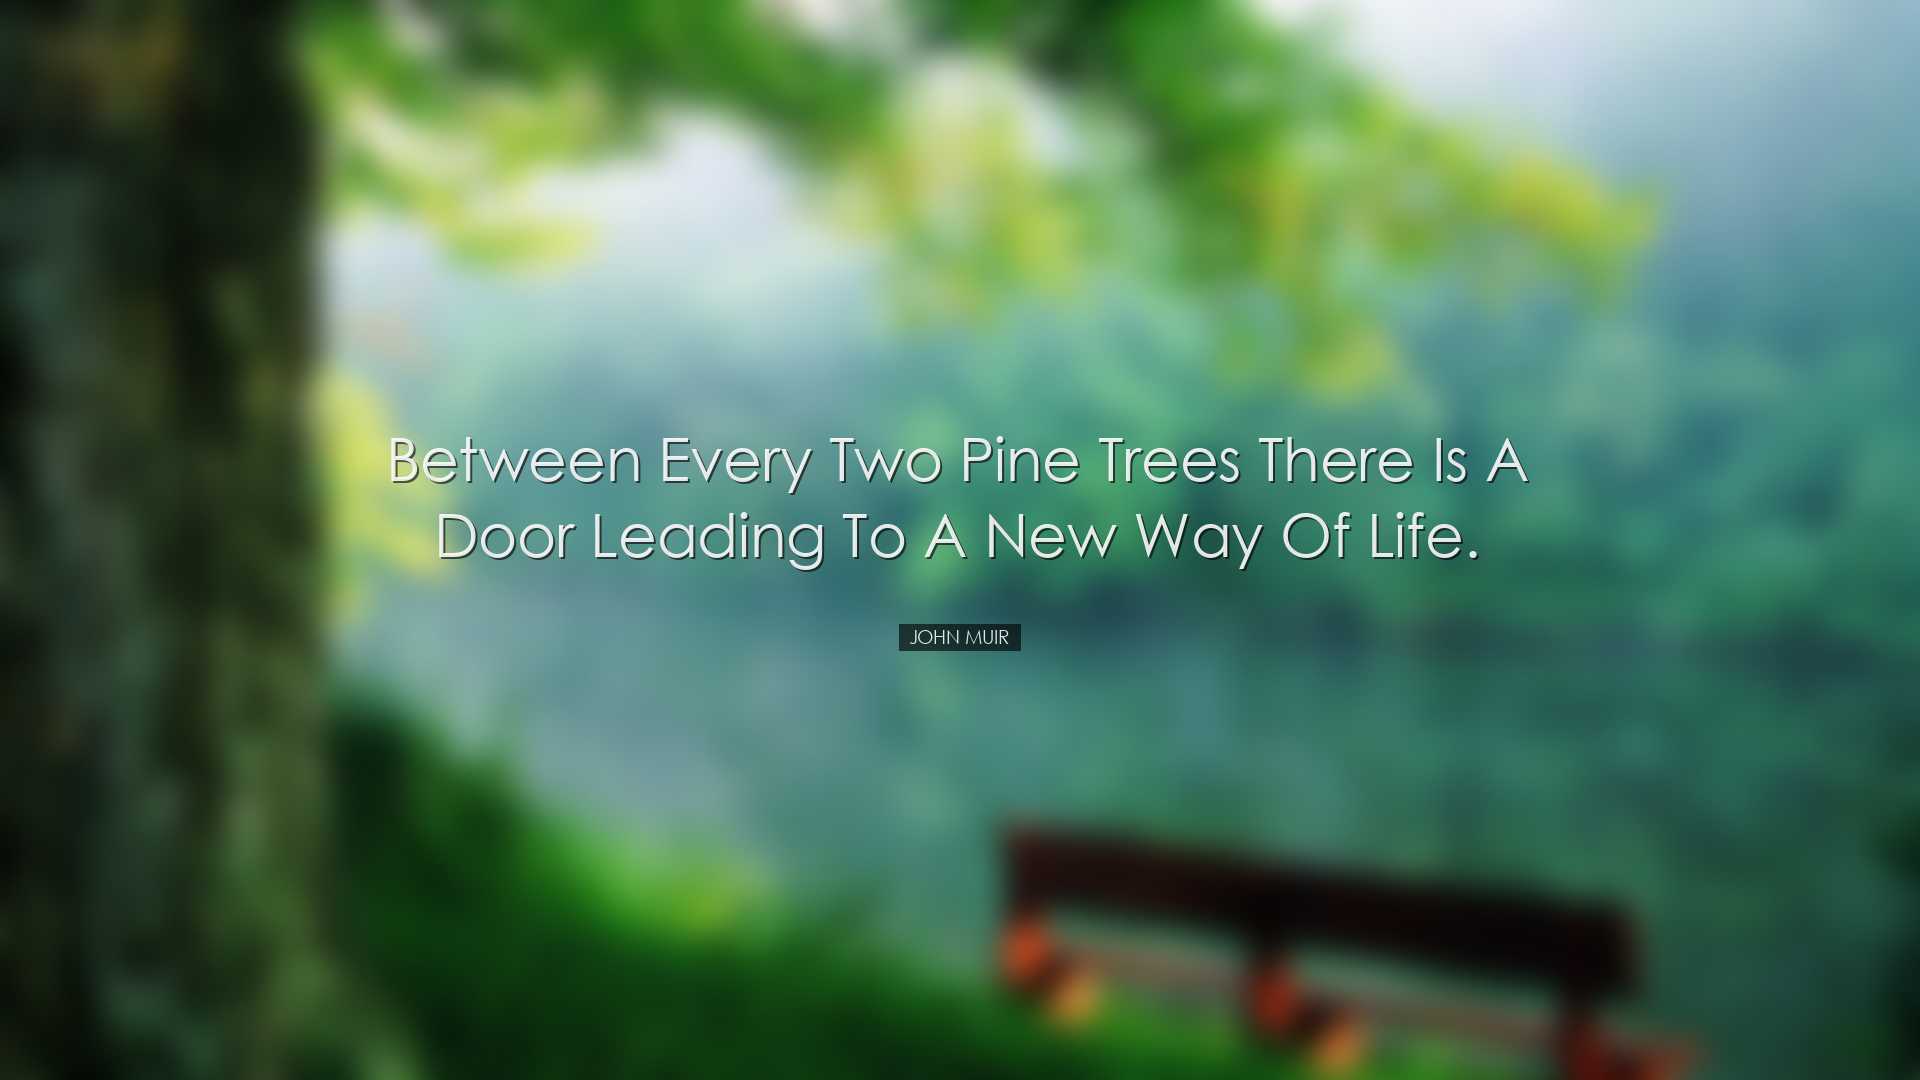 Between every two pine trees there is a door leading to a new way